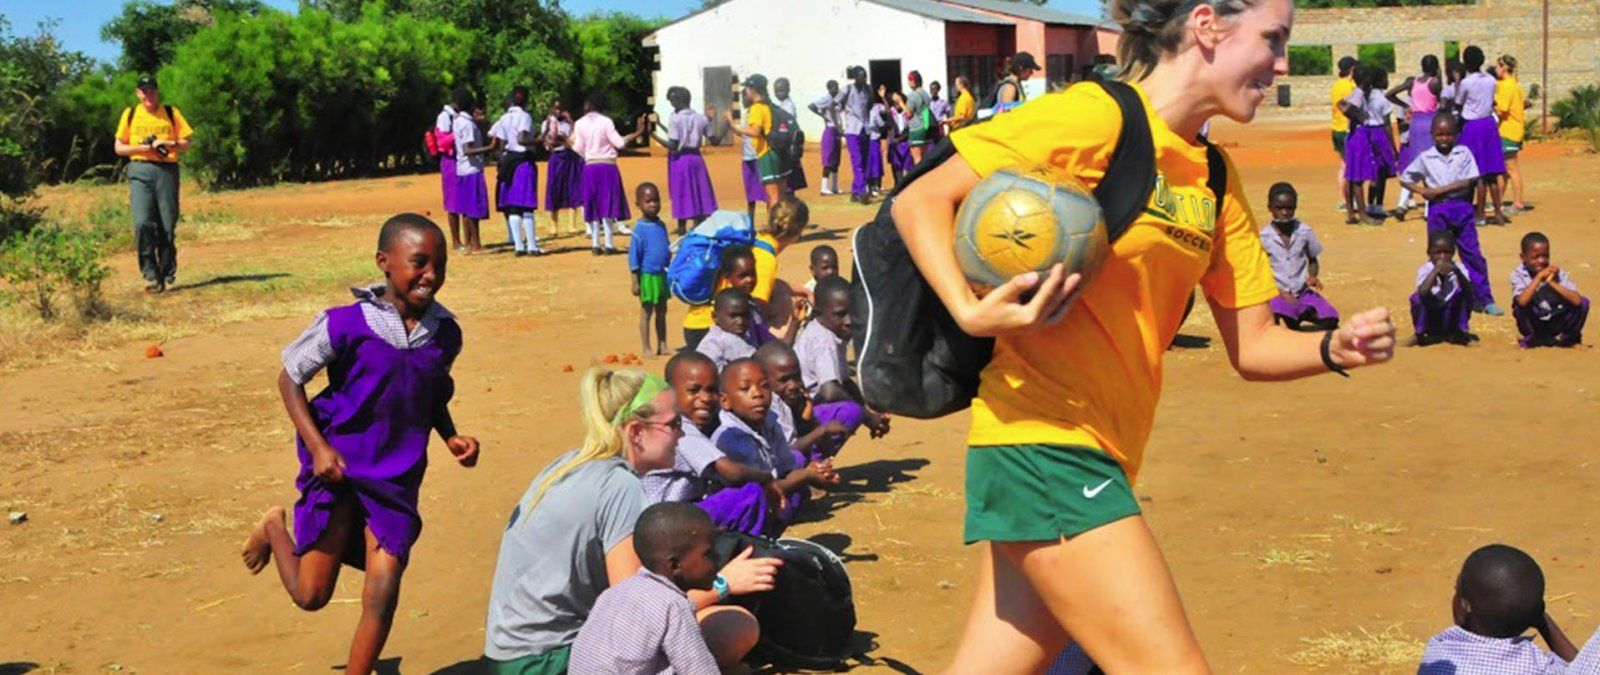 A female soccer player carrying a soccer ball is chased by a child in Zambia around a circle.